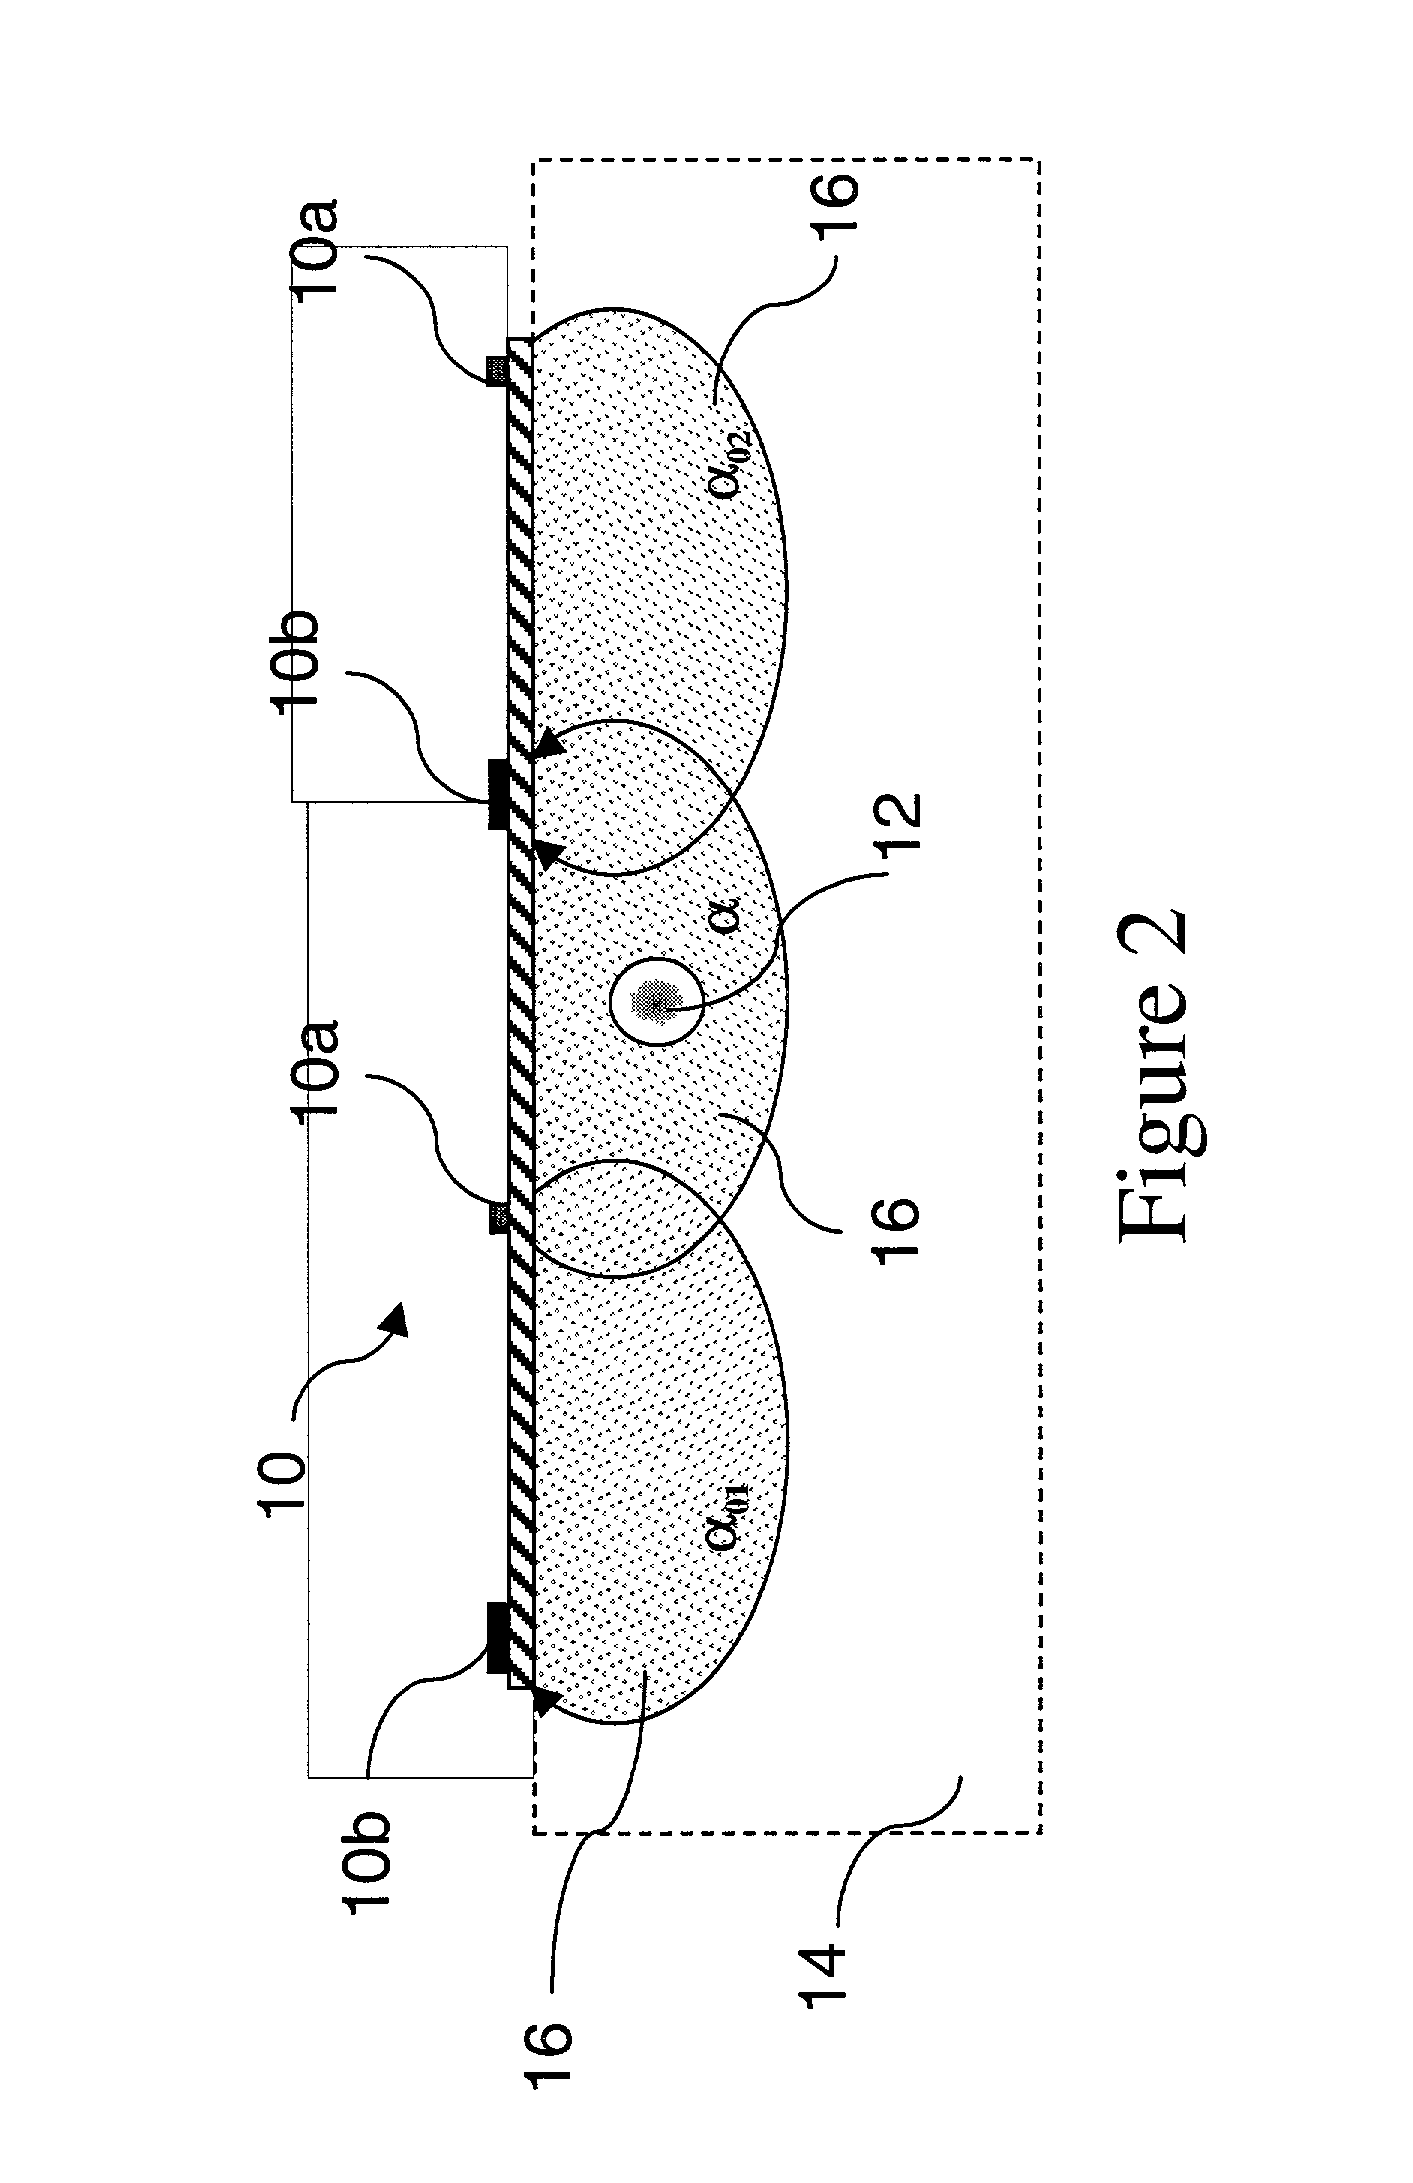 Method of measuring transcutaneous access blood flow